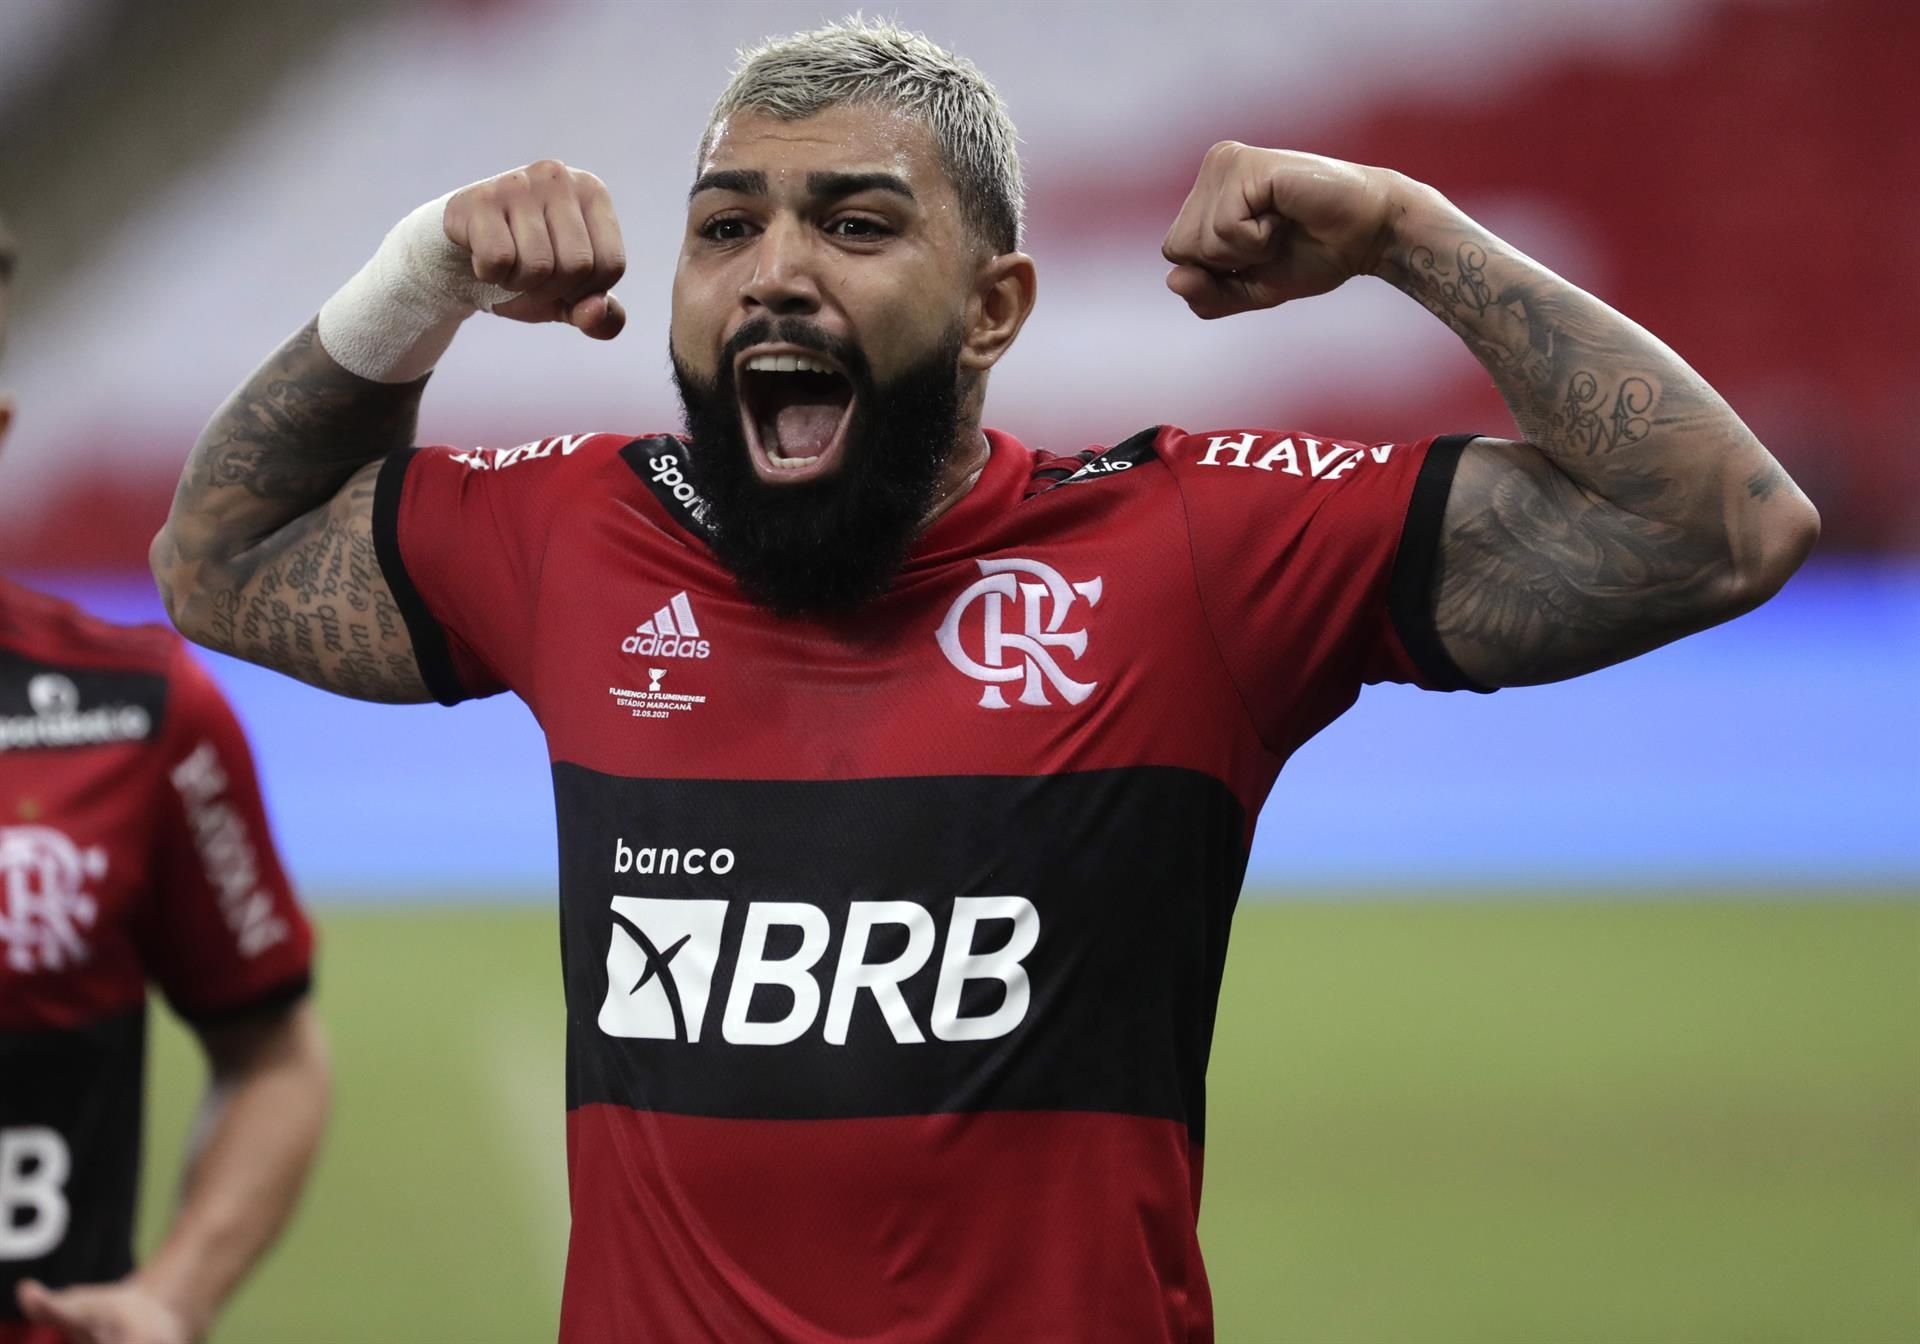 Gabigol suspended for two years for attempting to deceive anti-doping control